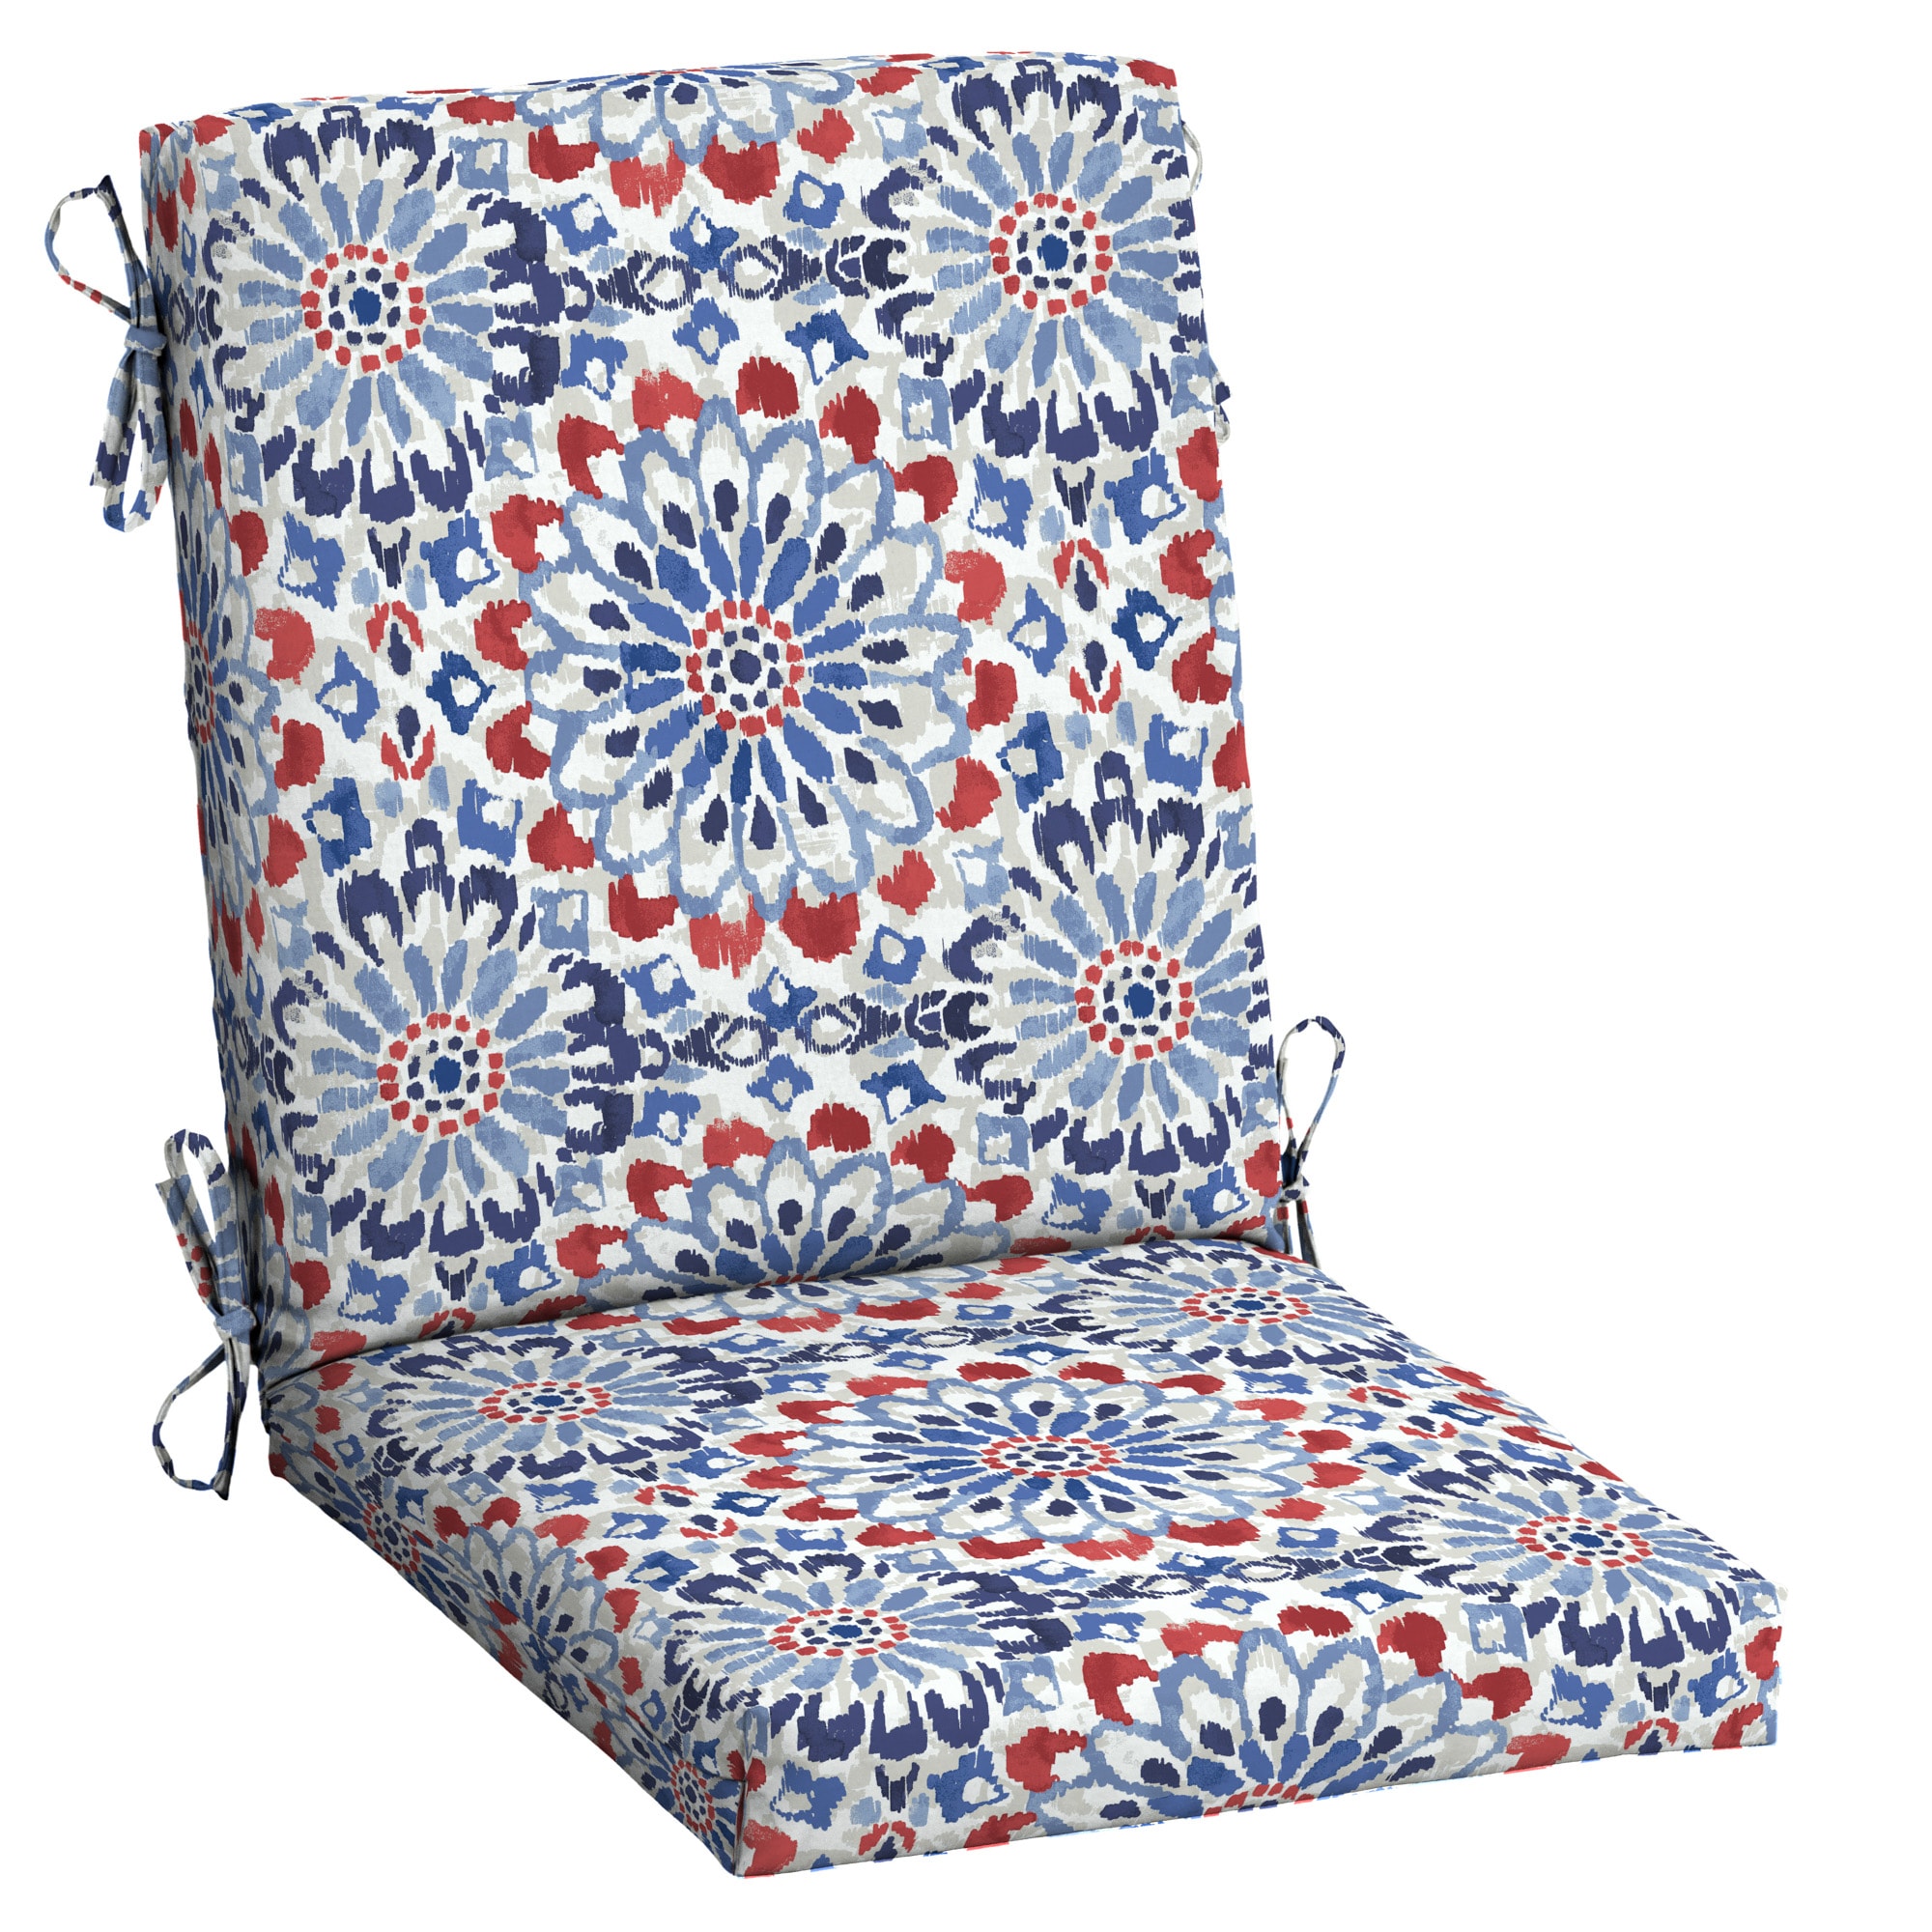 Arden Selections Clark High Back Patio, Bed Bath And Beyond Patio Chair Pads